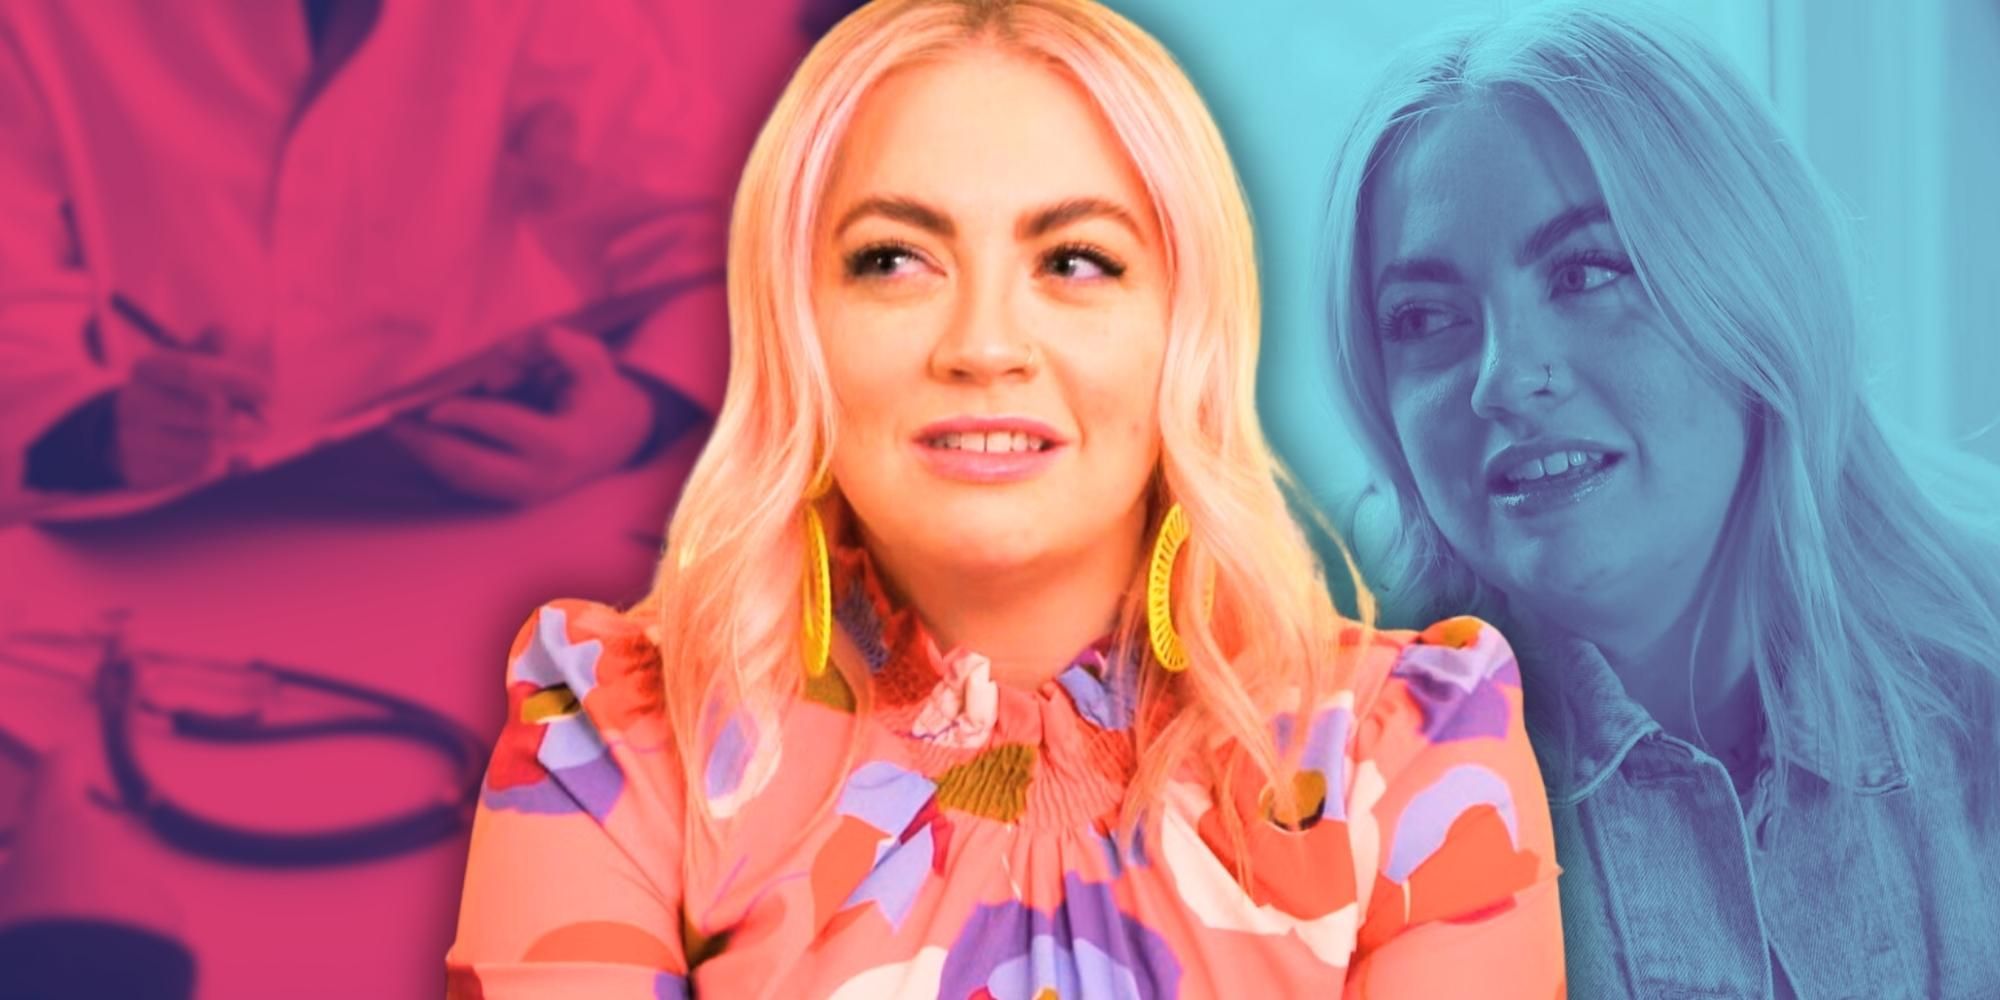 Married At First Sight Season 17's Becca wearing orange shirt and yellow hoop earrings with red and blue background photos behind her